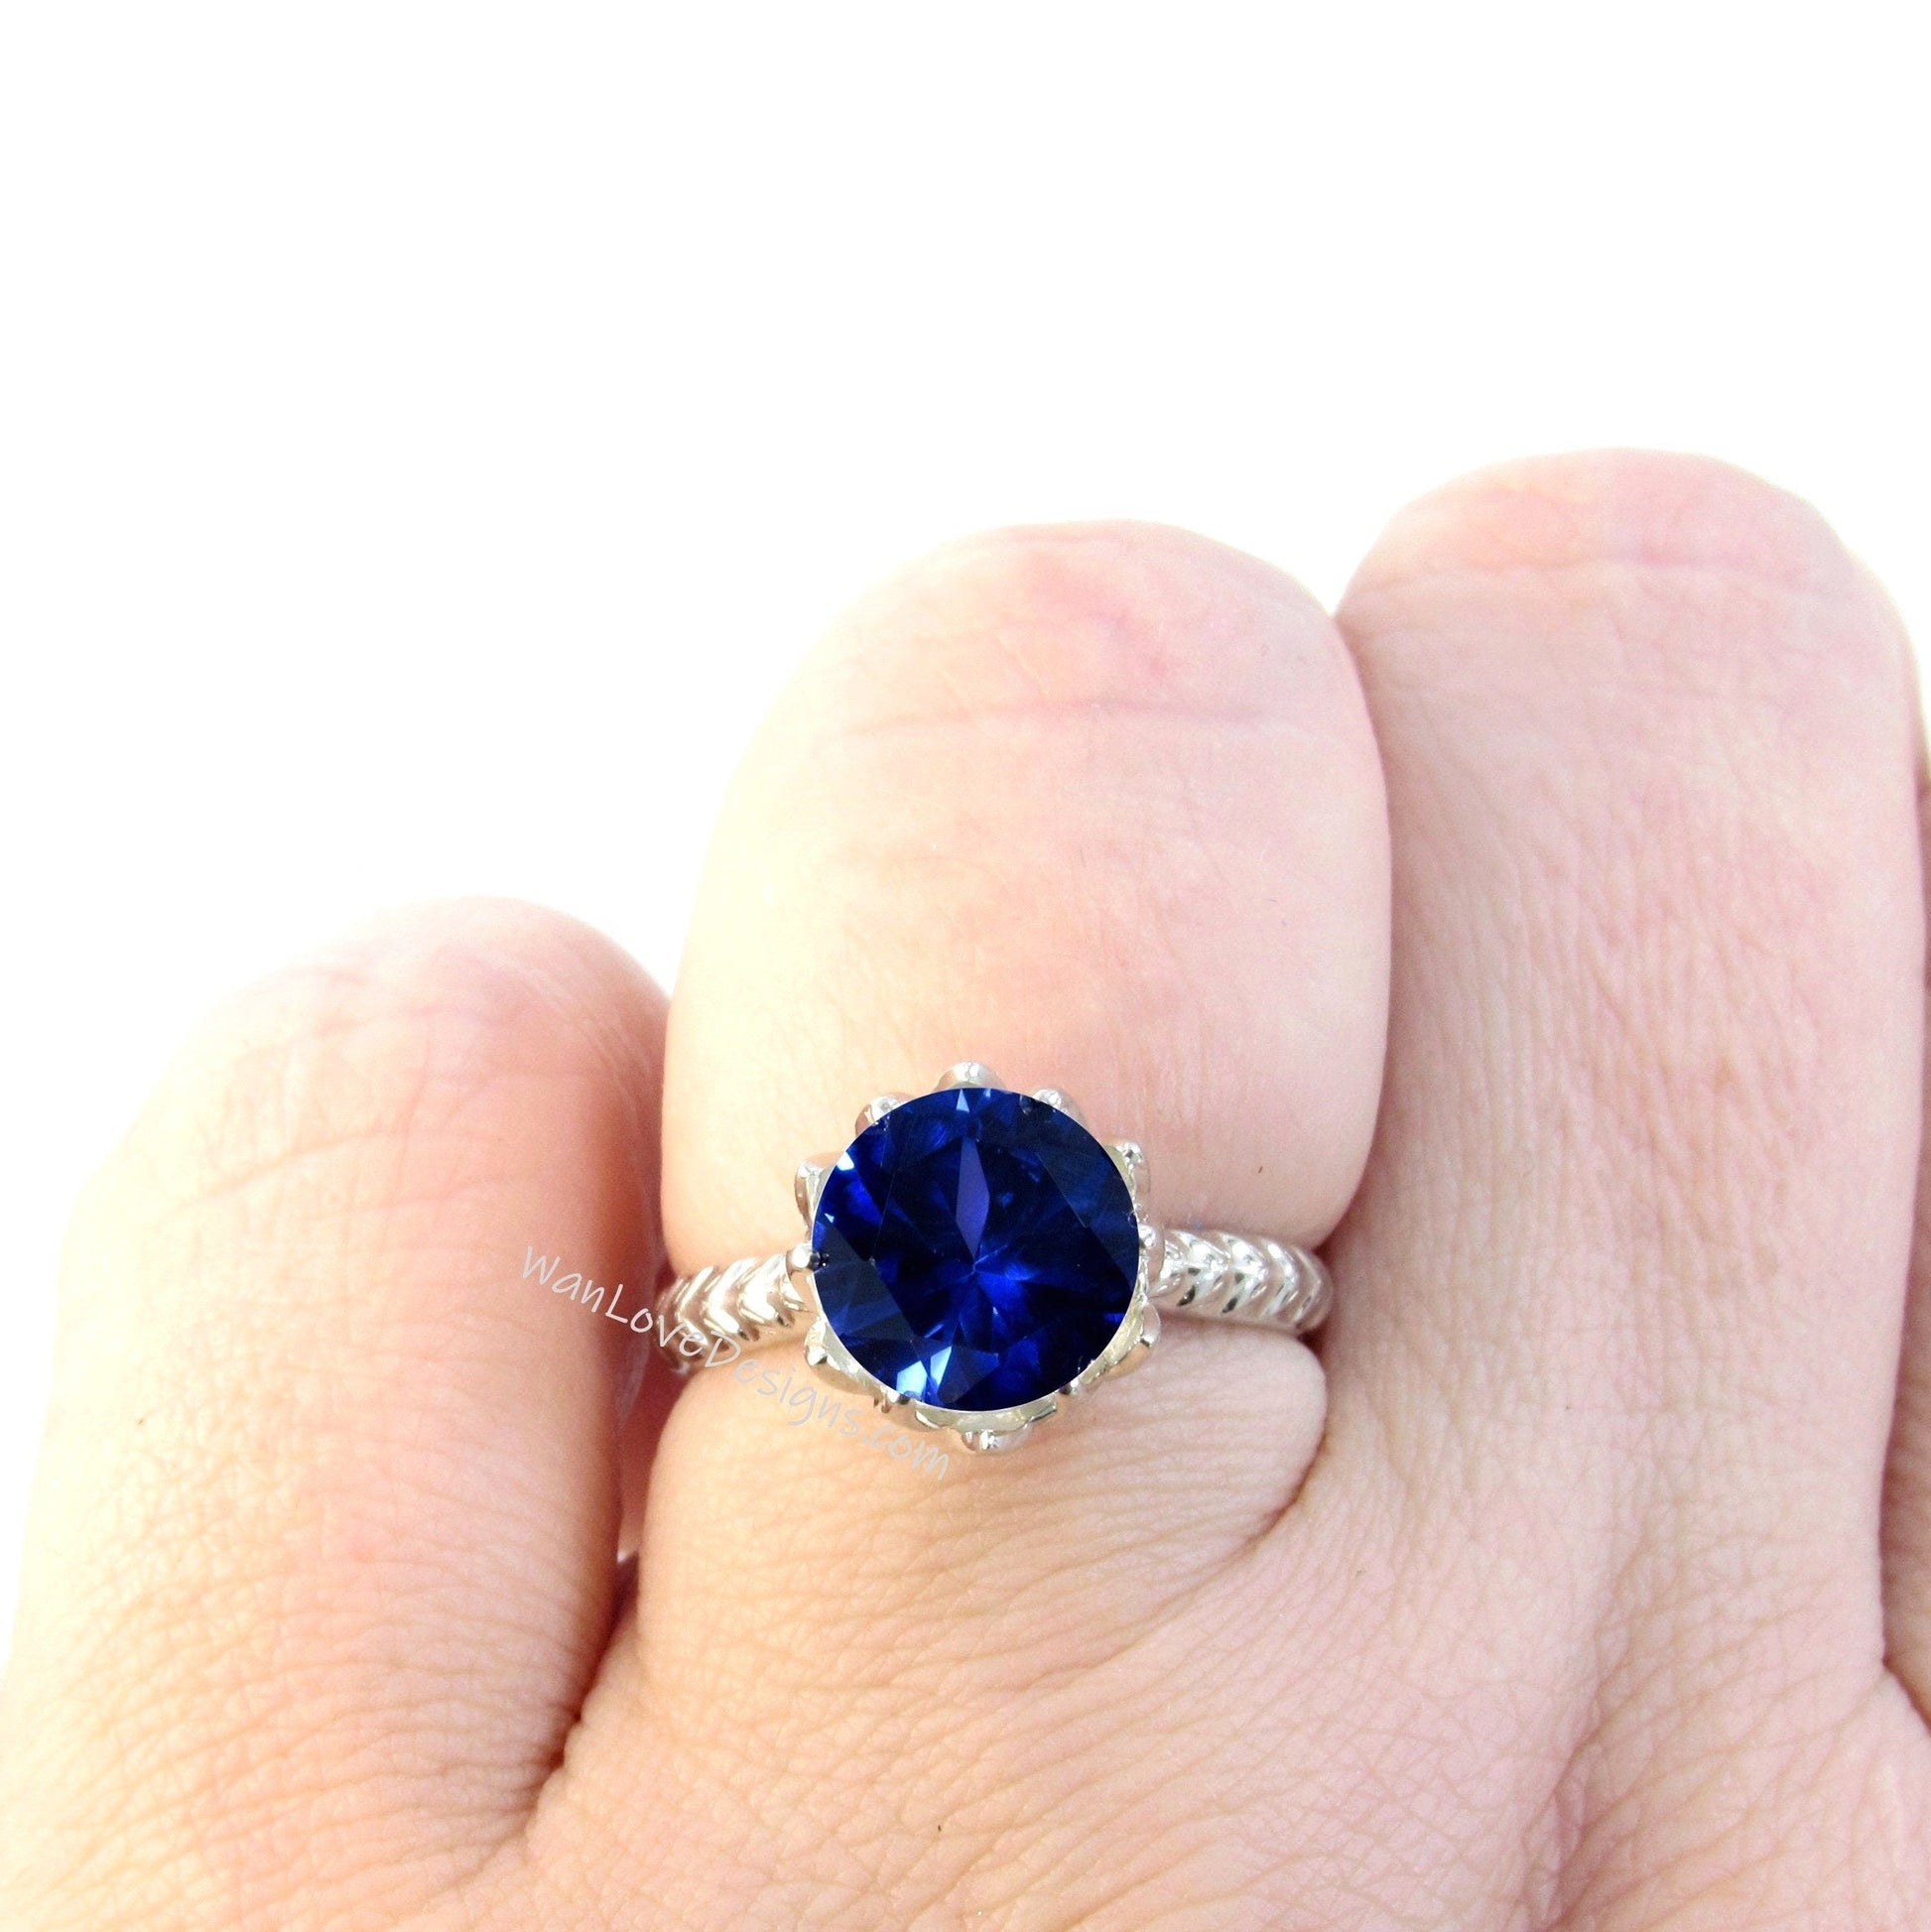 Round cut Blue Sapphire engagement ring vintage Lotus Flower engagement ring woman nature leaf ring Unique Bridal ring Anniversary gift Wan Love Designs